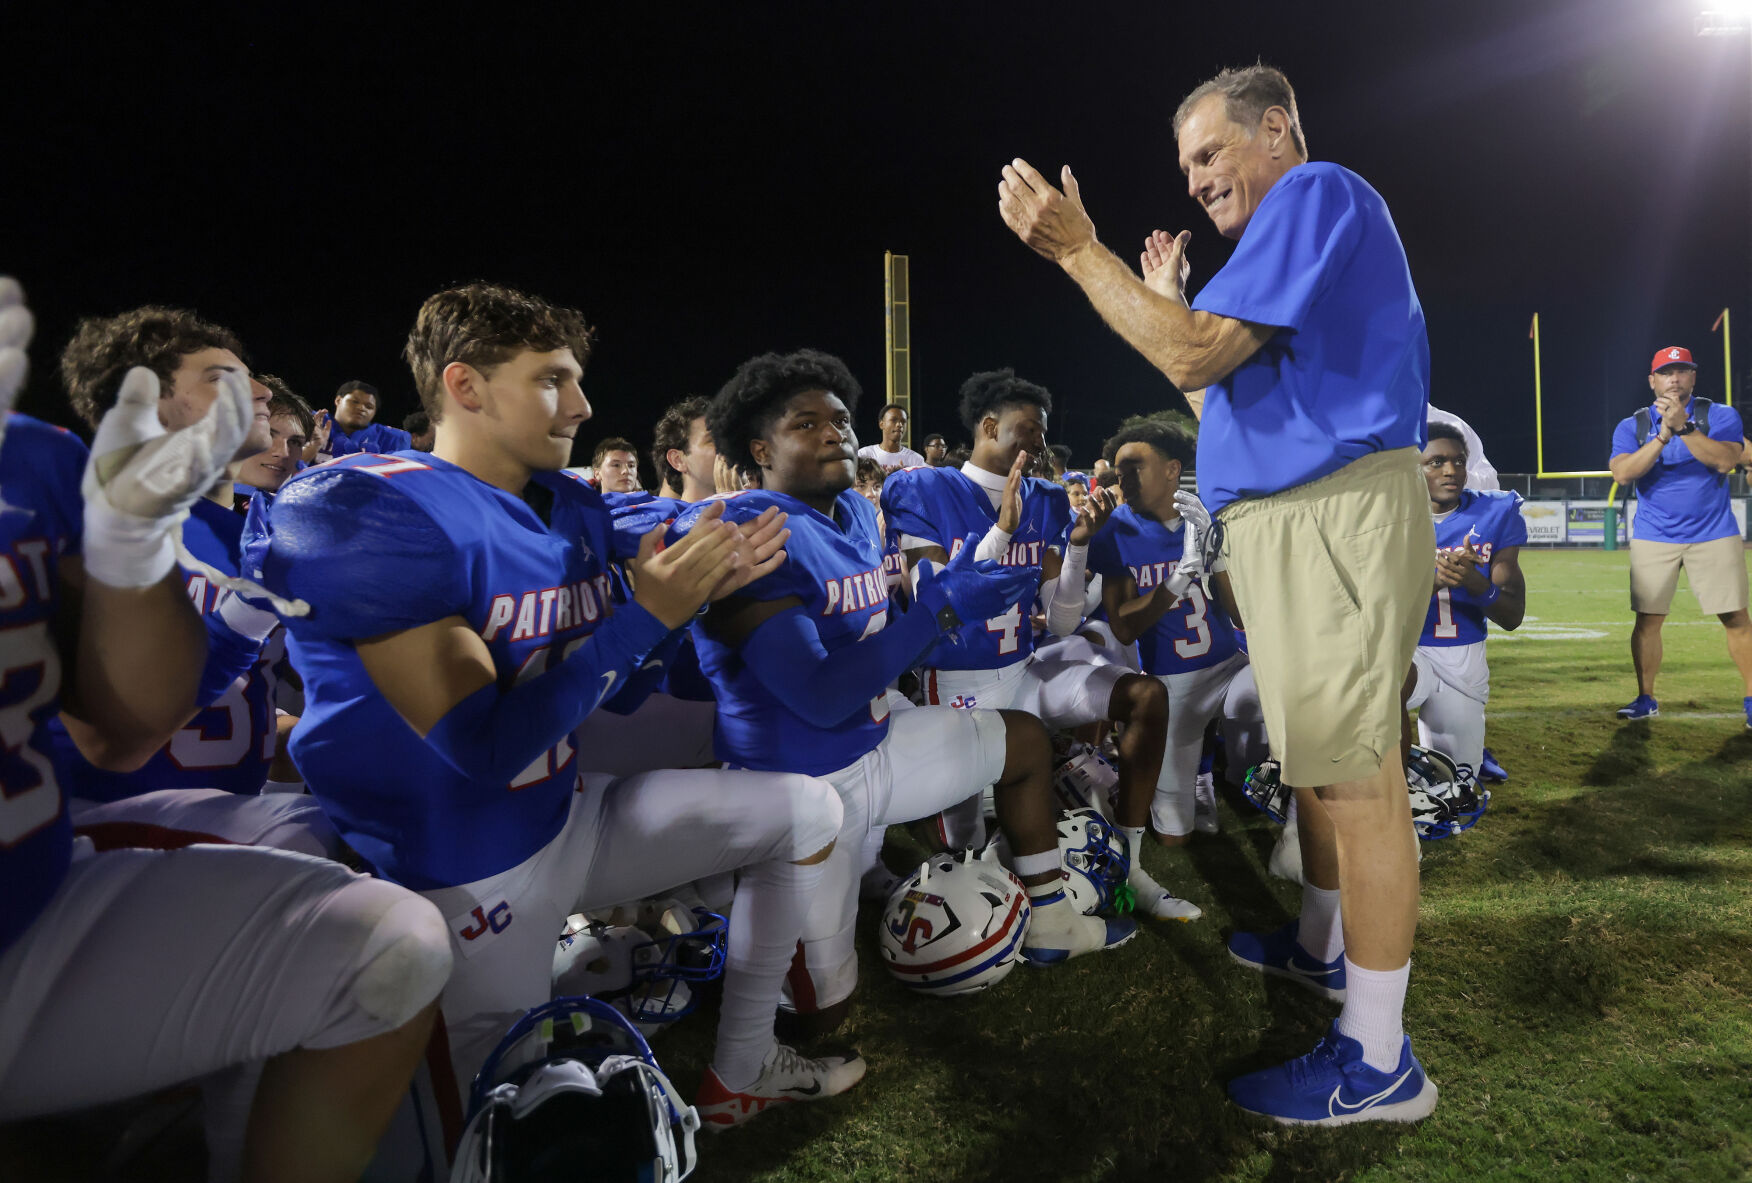 John Curtis vs St. Augustine: High-Scoring Playoff Matchup Ends with John Curtis Victory